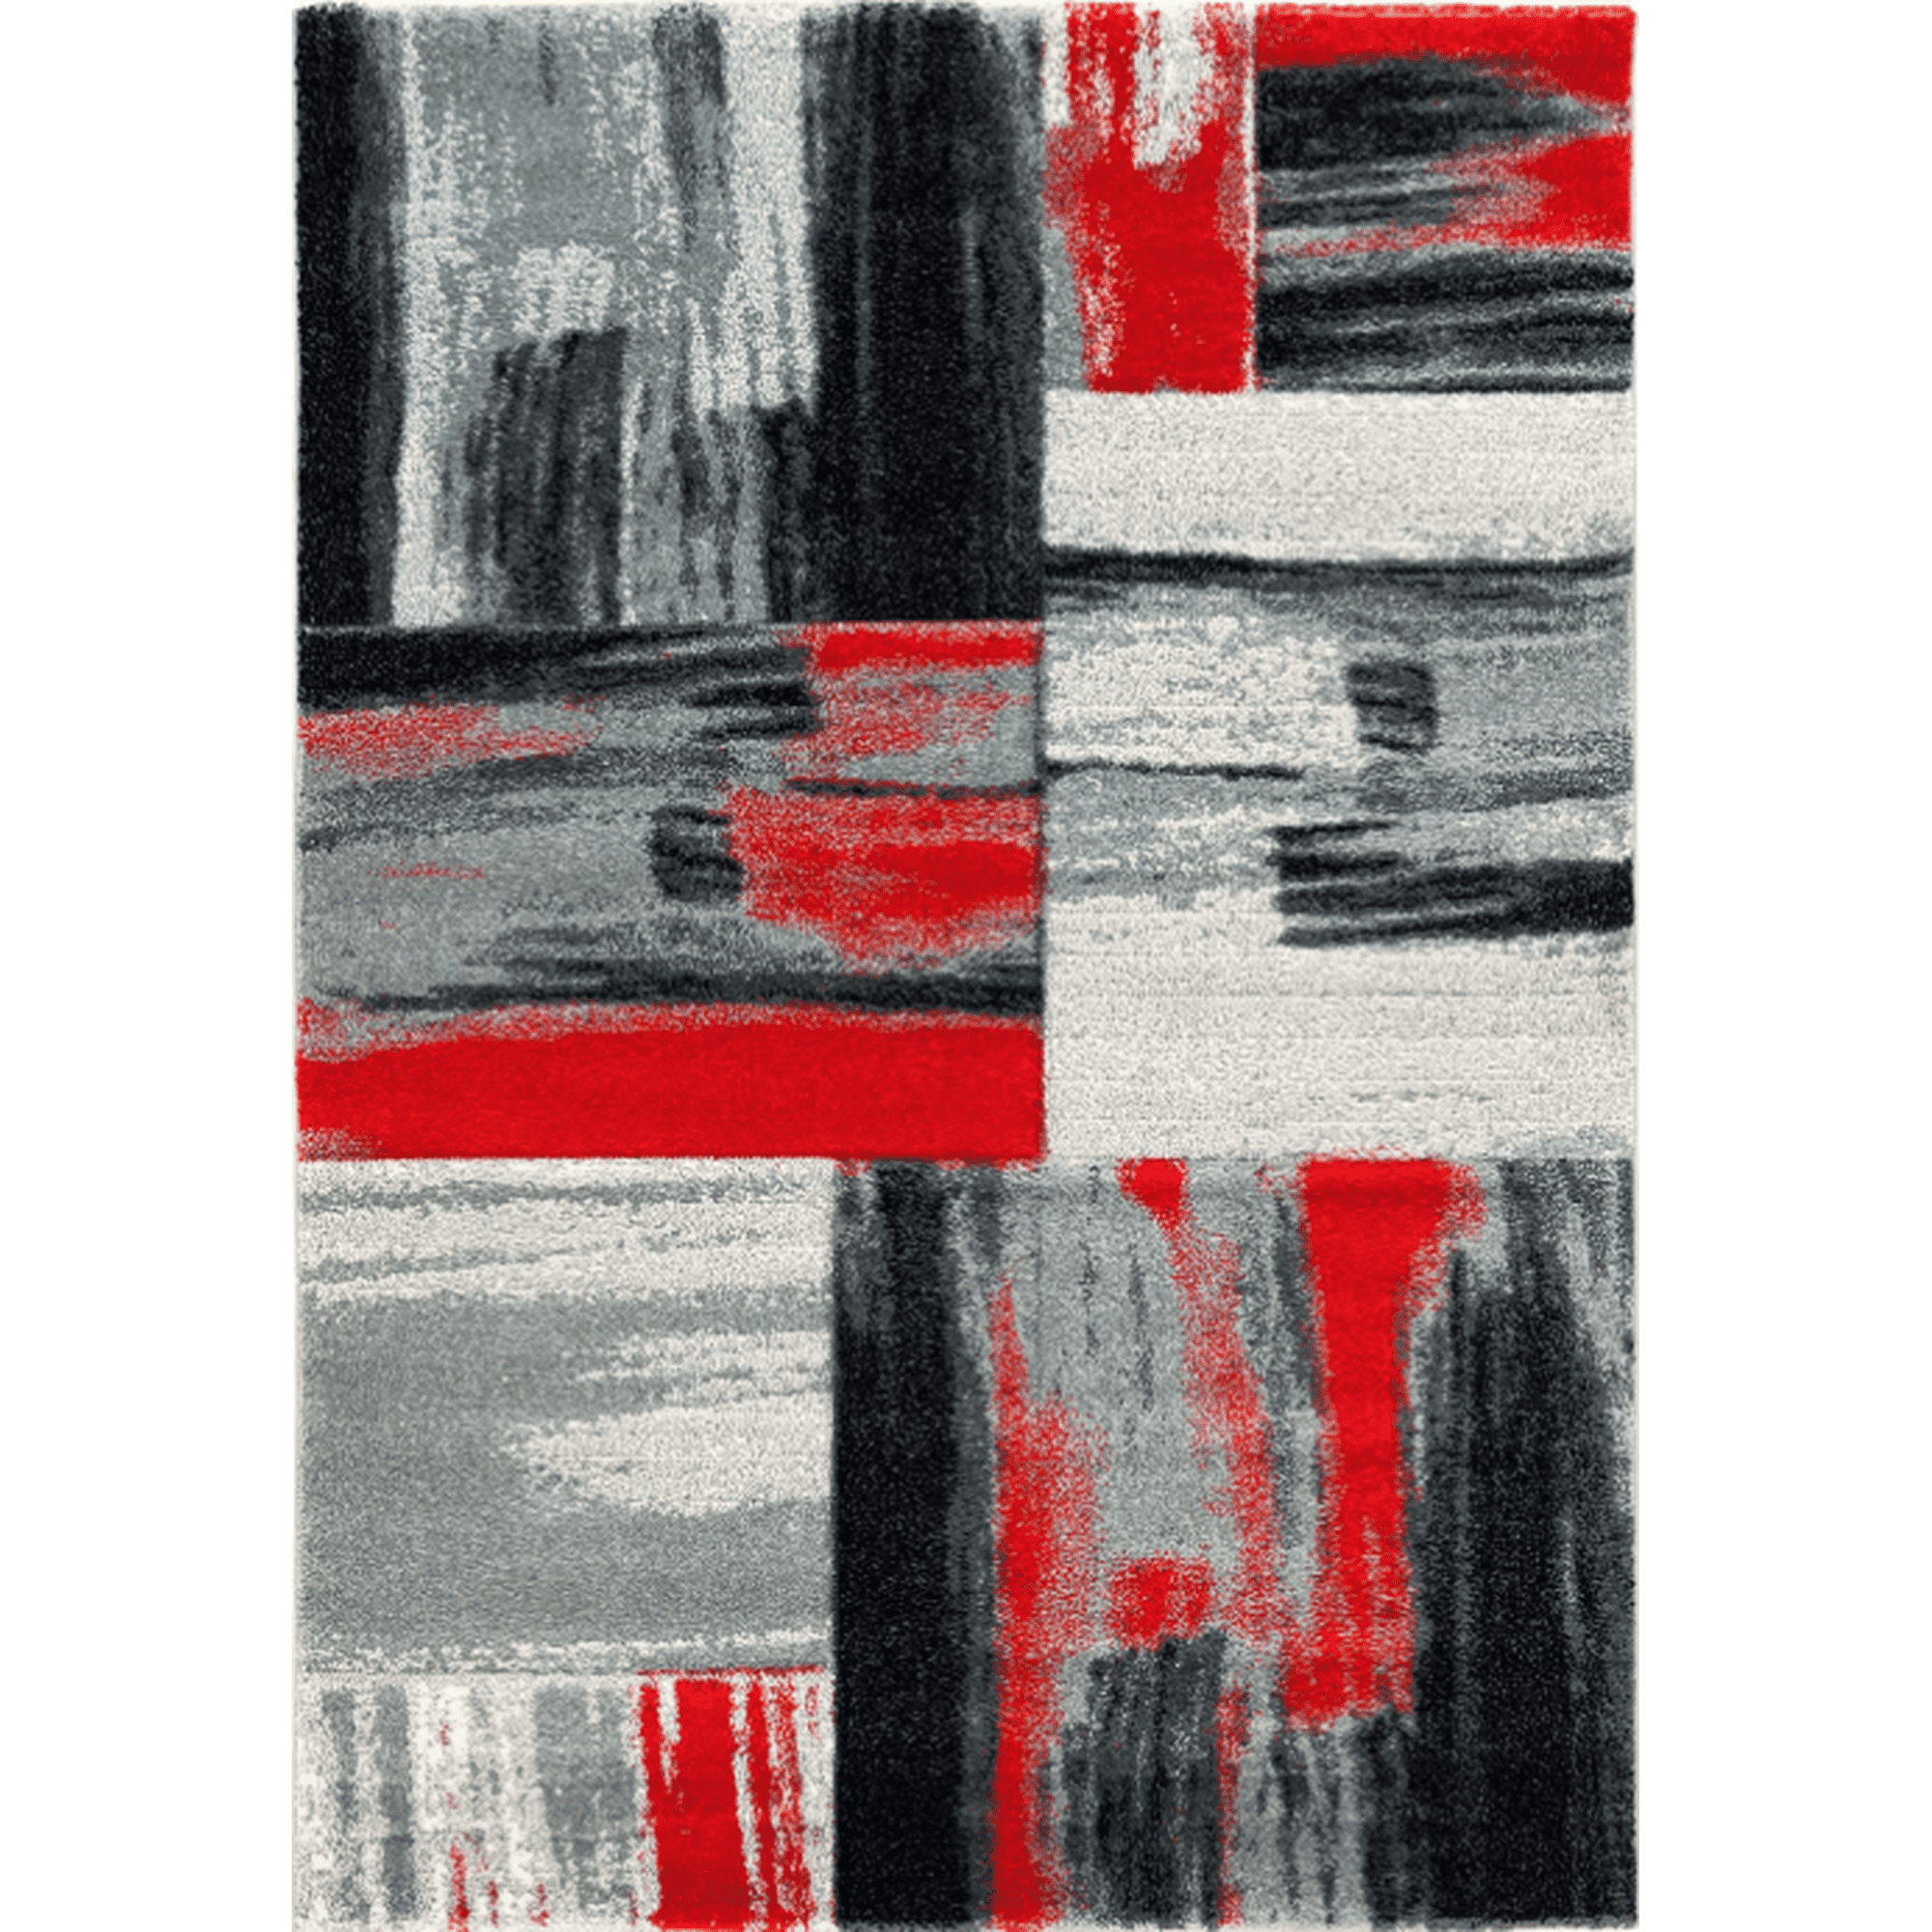 La Dole Rugs Red And Blue Contemporary, Blue Grey And Red Area Rugs